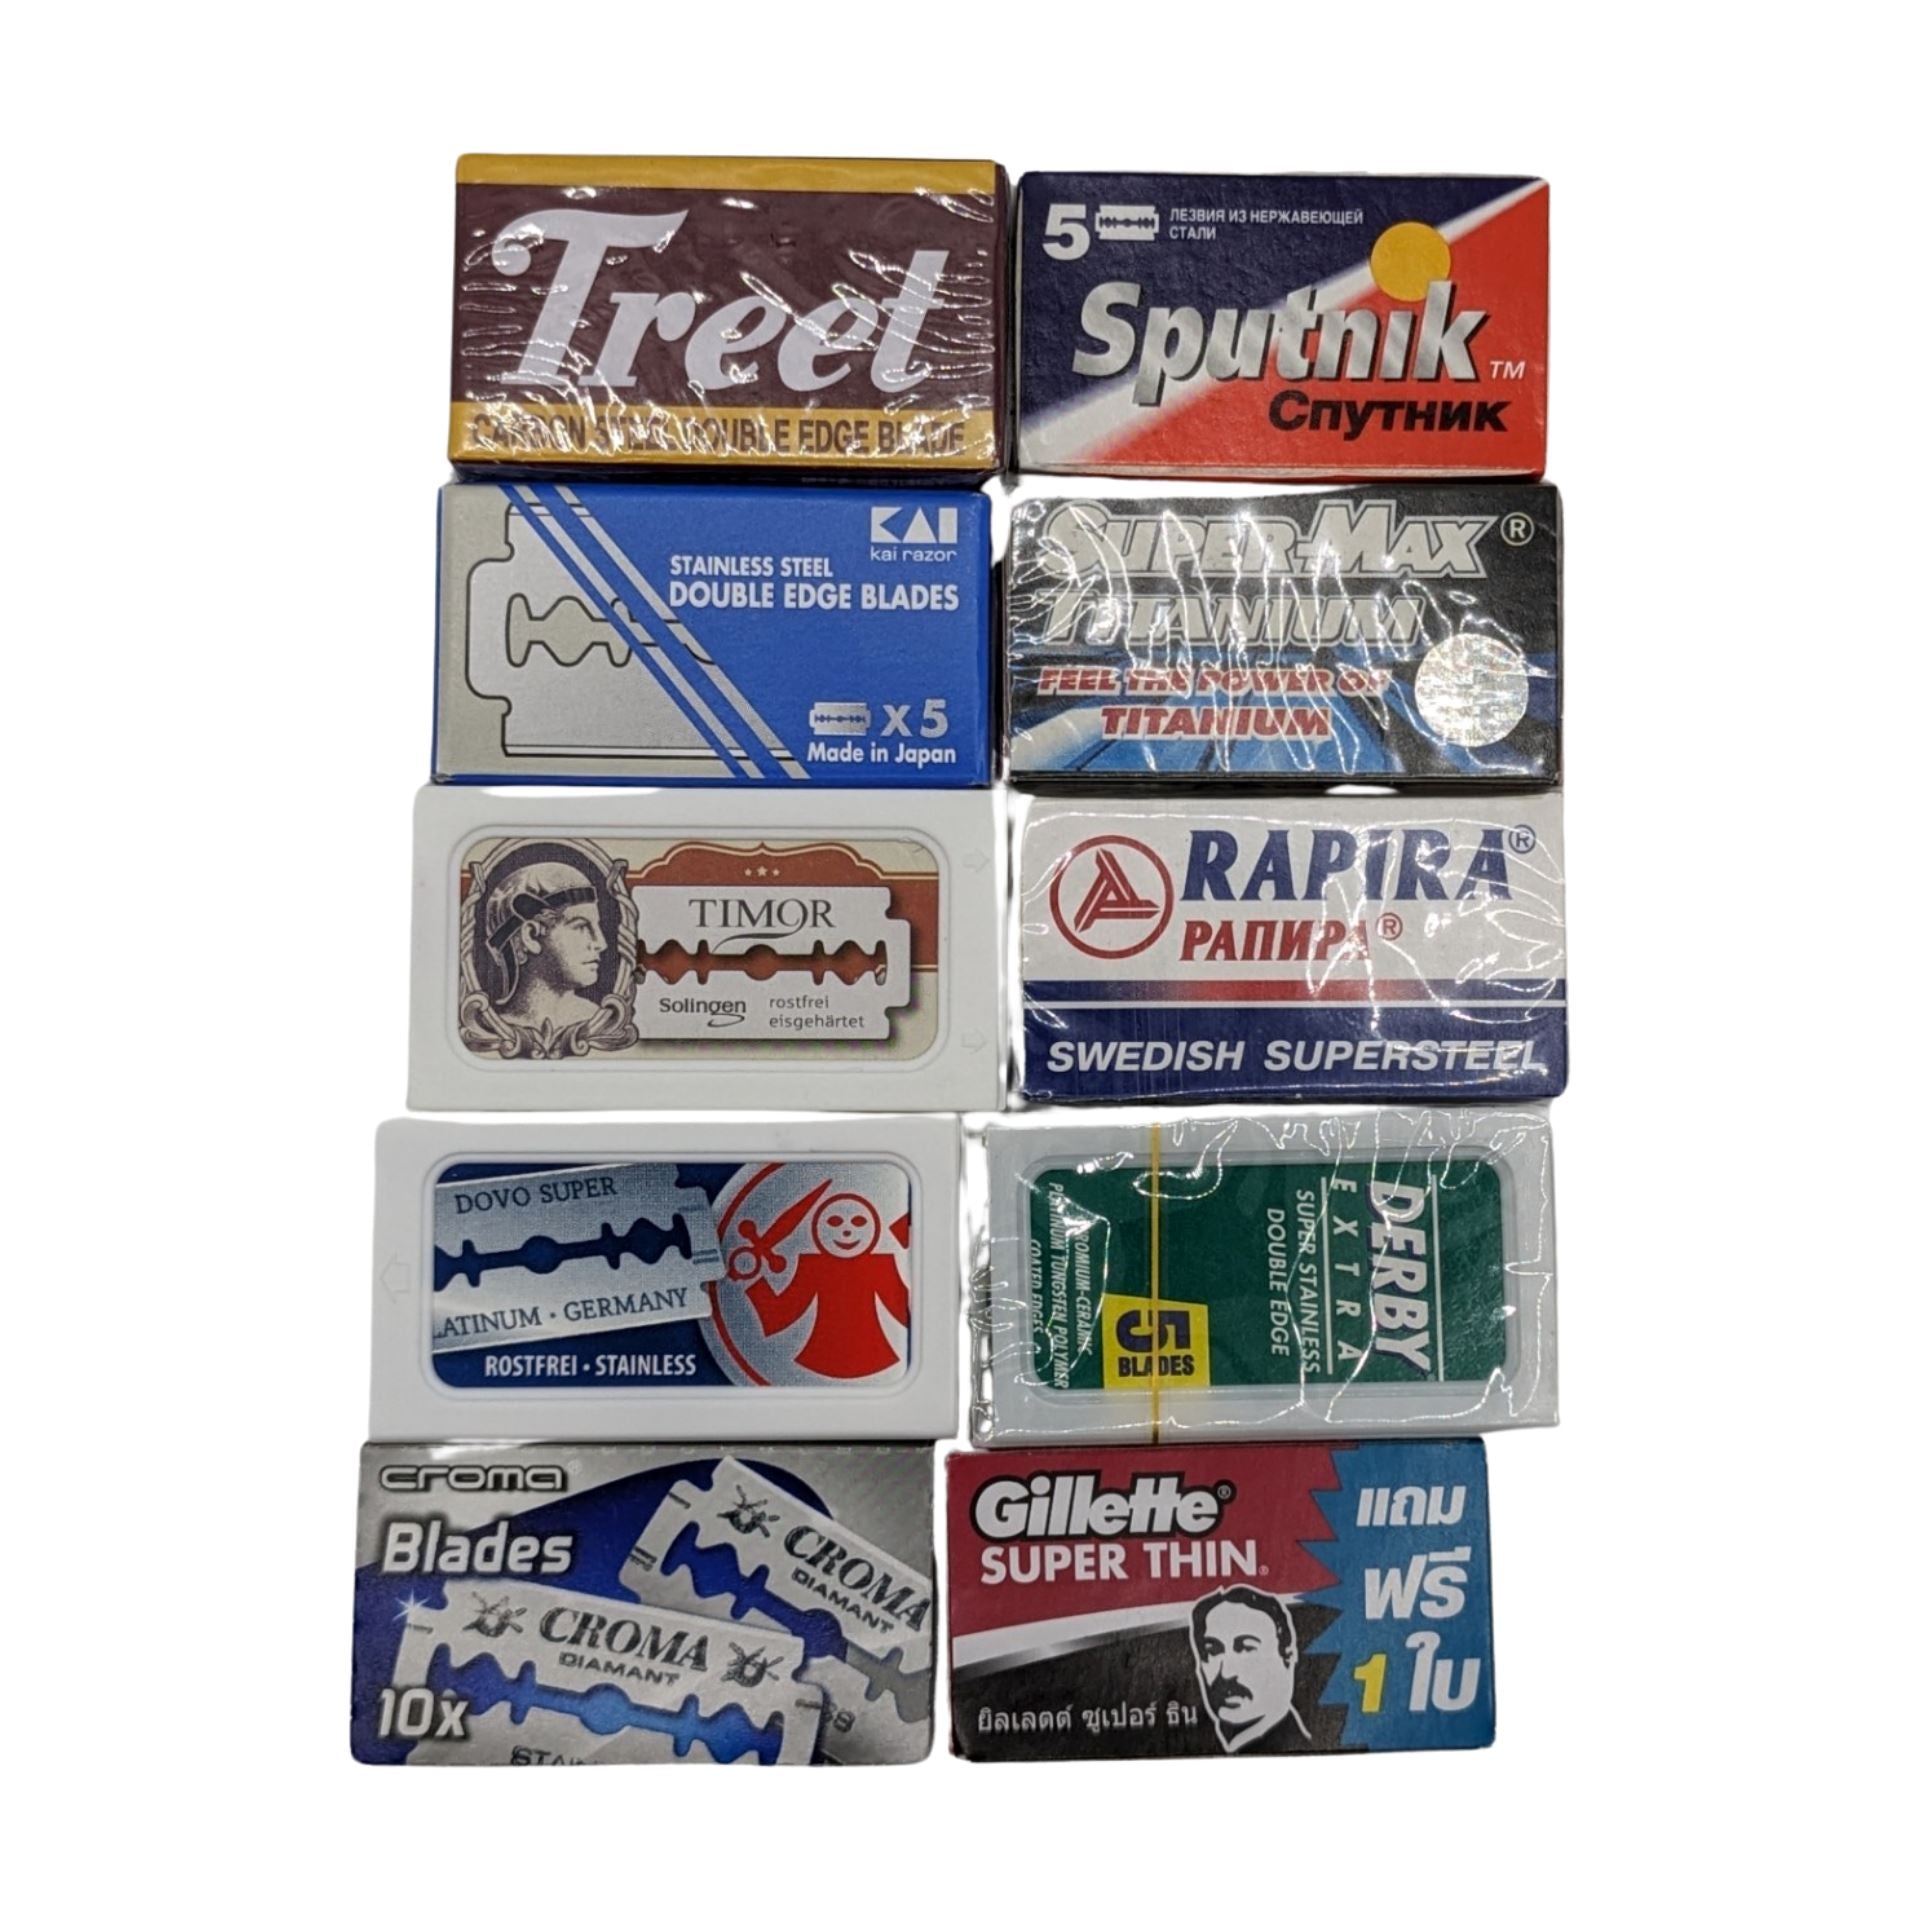 Multiple Lots of Misc. Unused DE Razor Blades - (Used) Razor Blades MM Consigns (CB) Pack 1 - 60 Blades (all unopened boxes) 